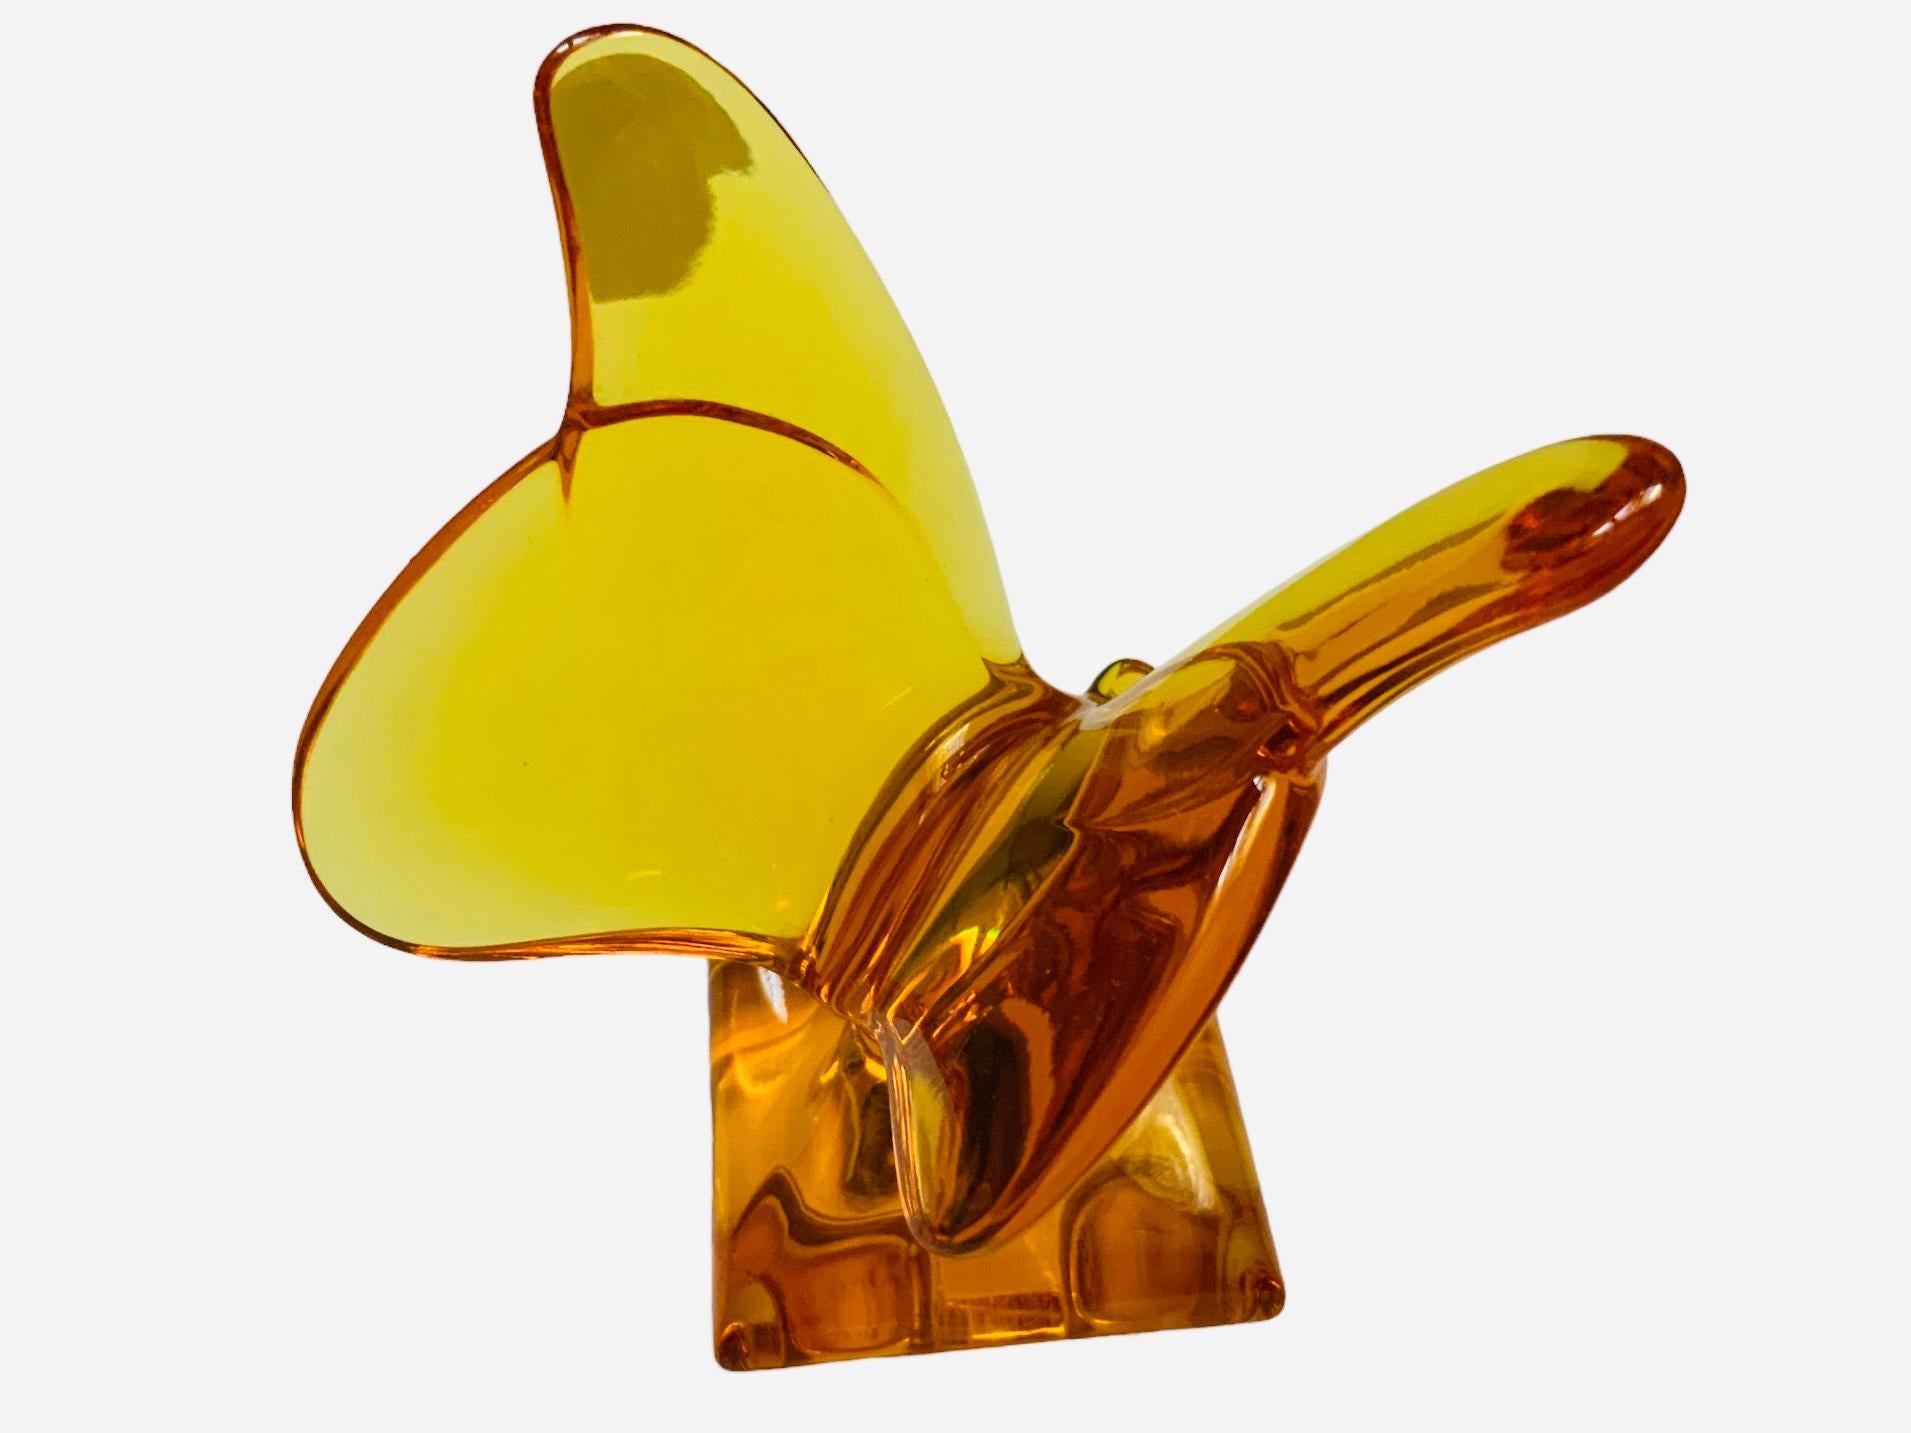 This is a Baccarat Crystal Butterfly sculpture/figurine . It depicts an amber color translucent crystal butterfly with its large wings open up supported also by a square crystal base. It has the acid etched hallmark of Baccarat  in one of the sides.